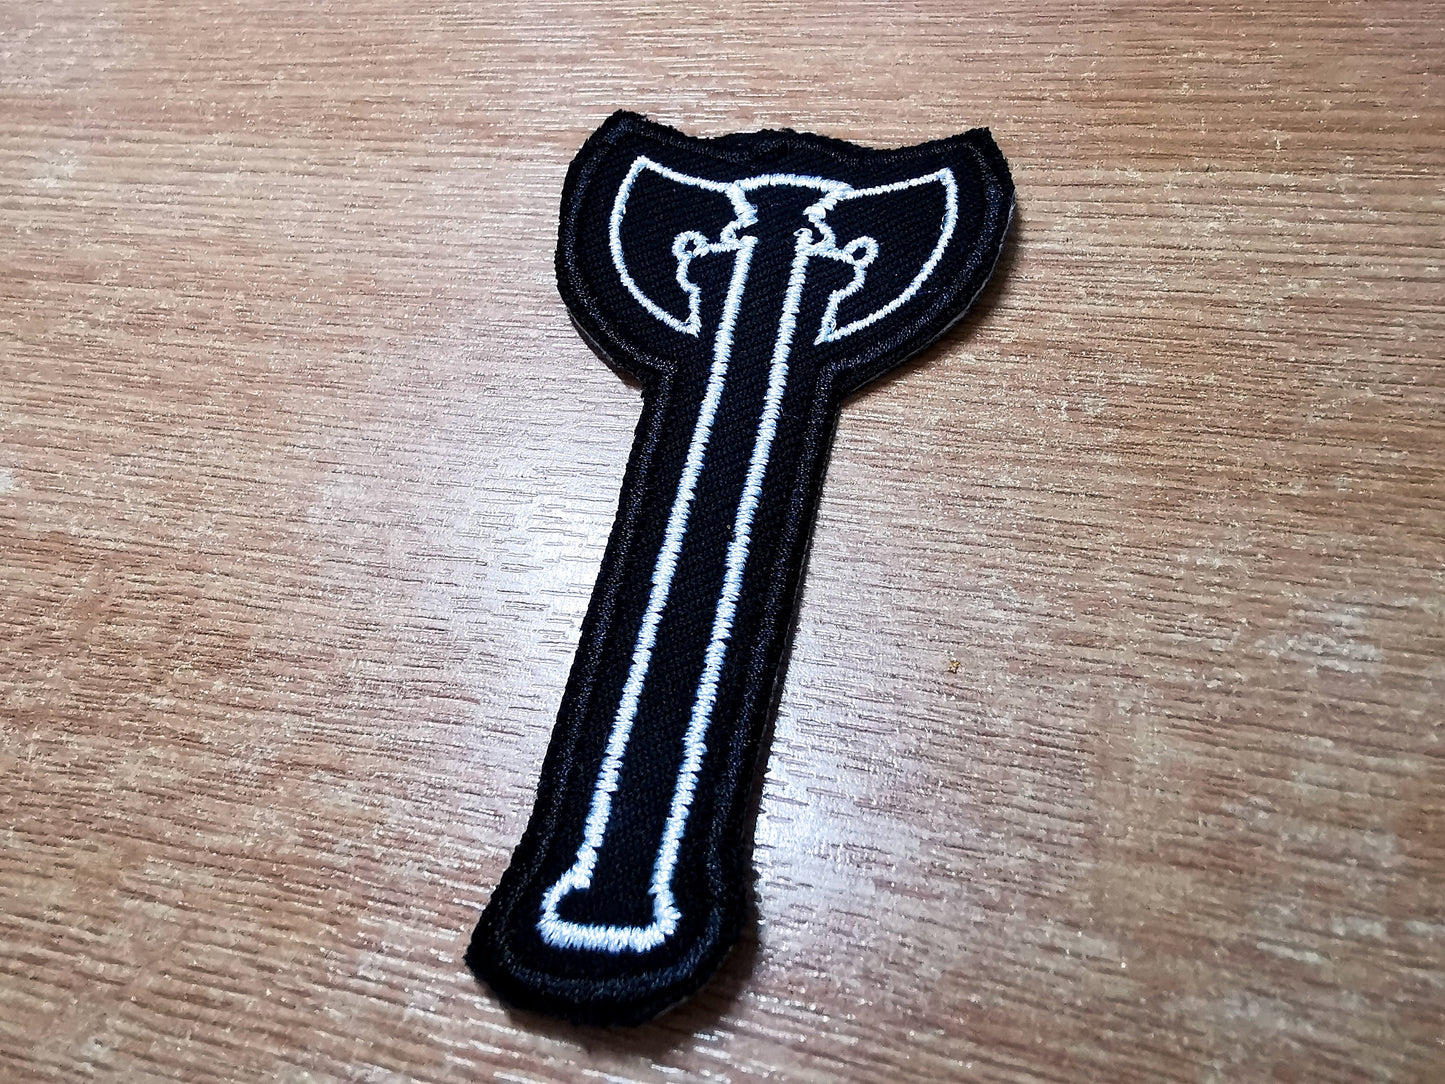 Battle Axe Embroidered Iron On Patch Destiny Fantasy RPG Vikings Medieval Dungeon Gaming